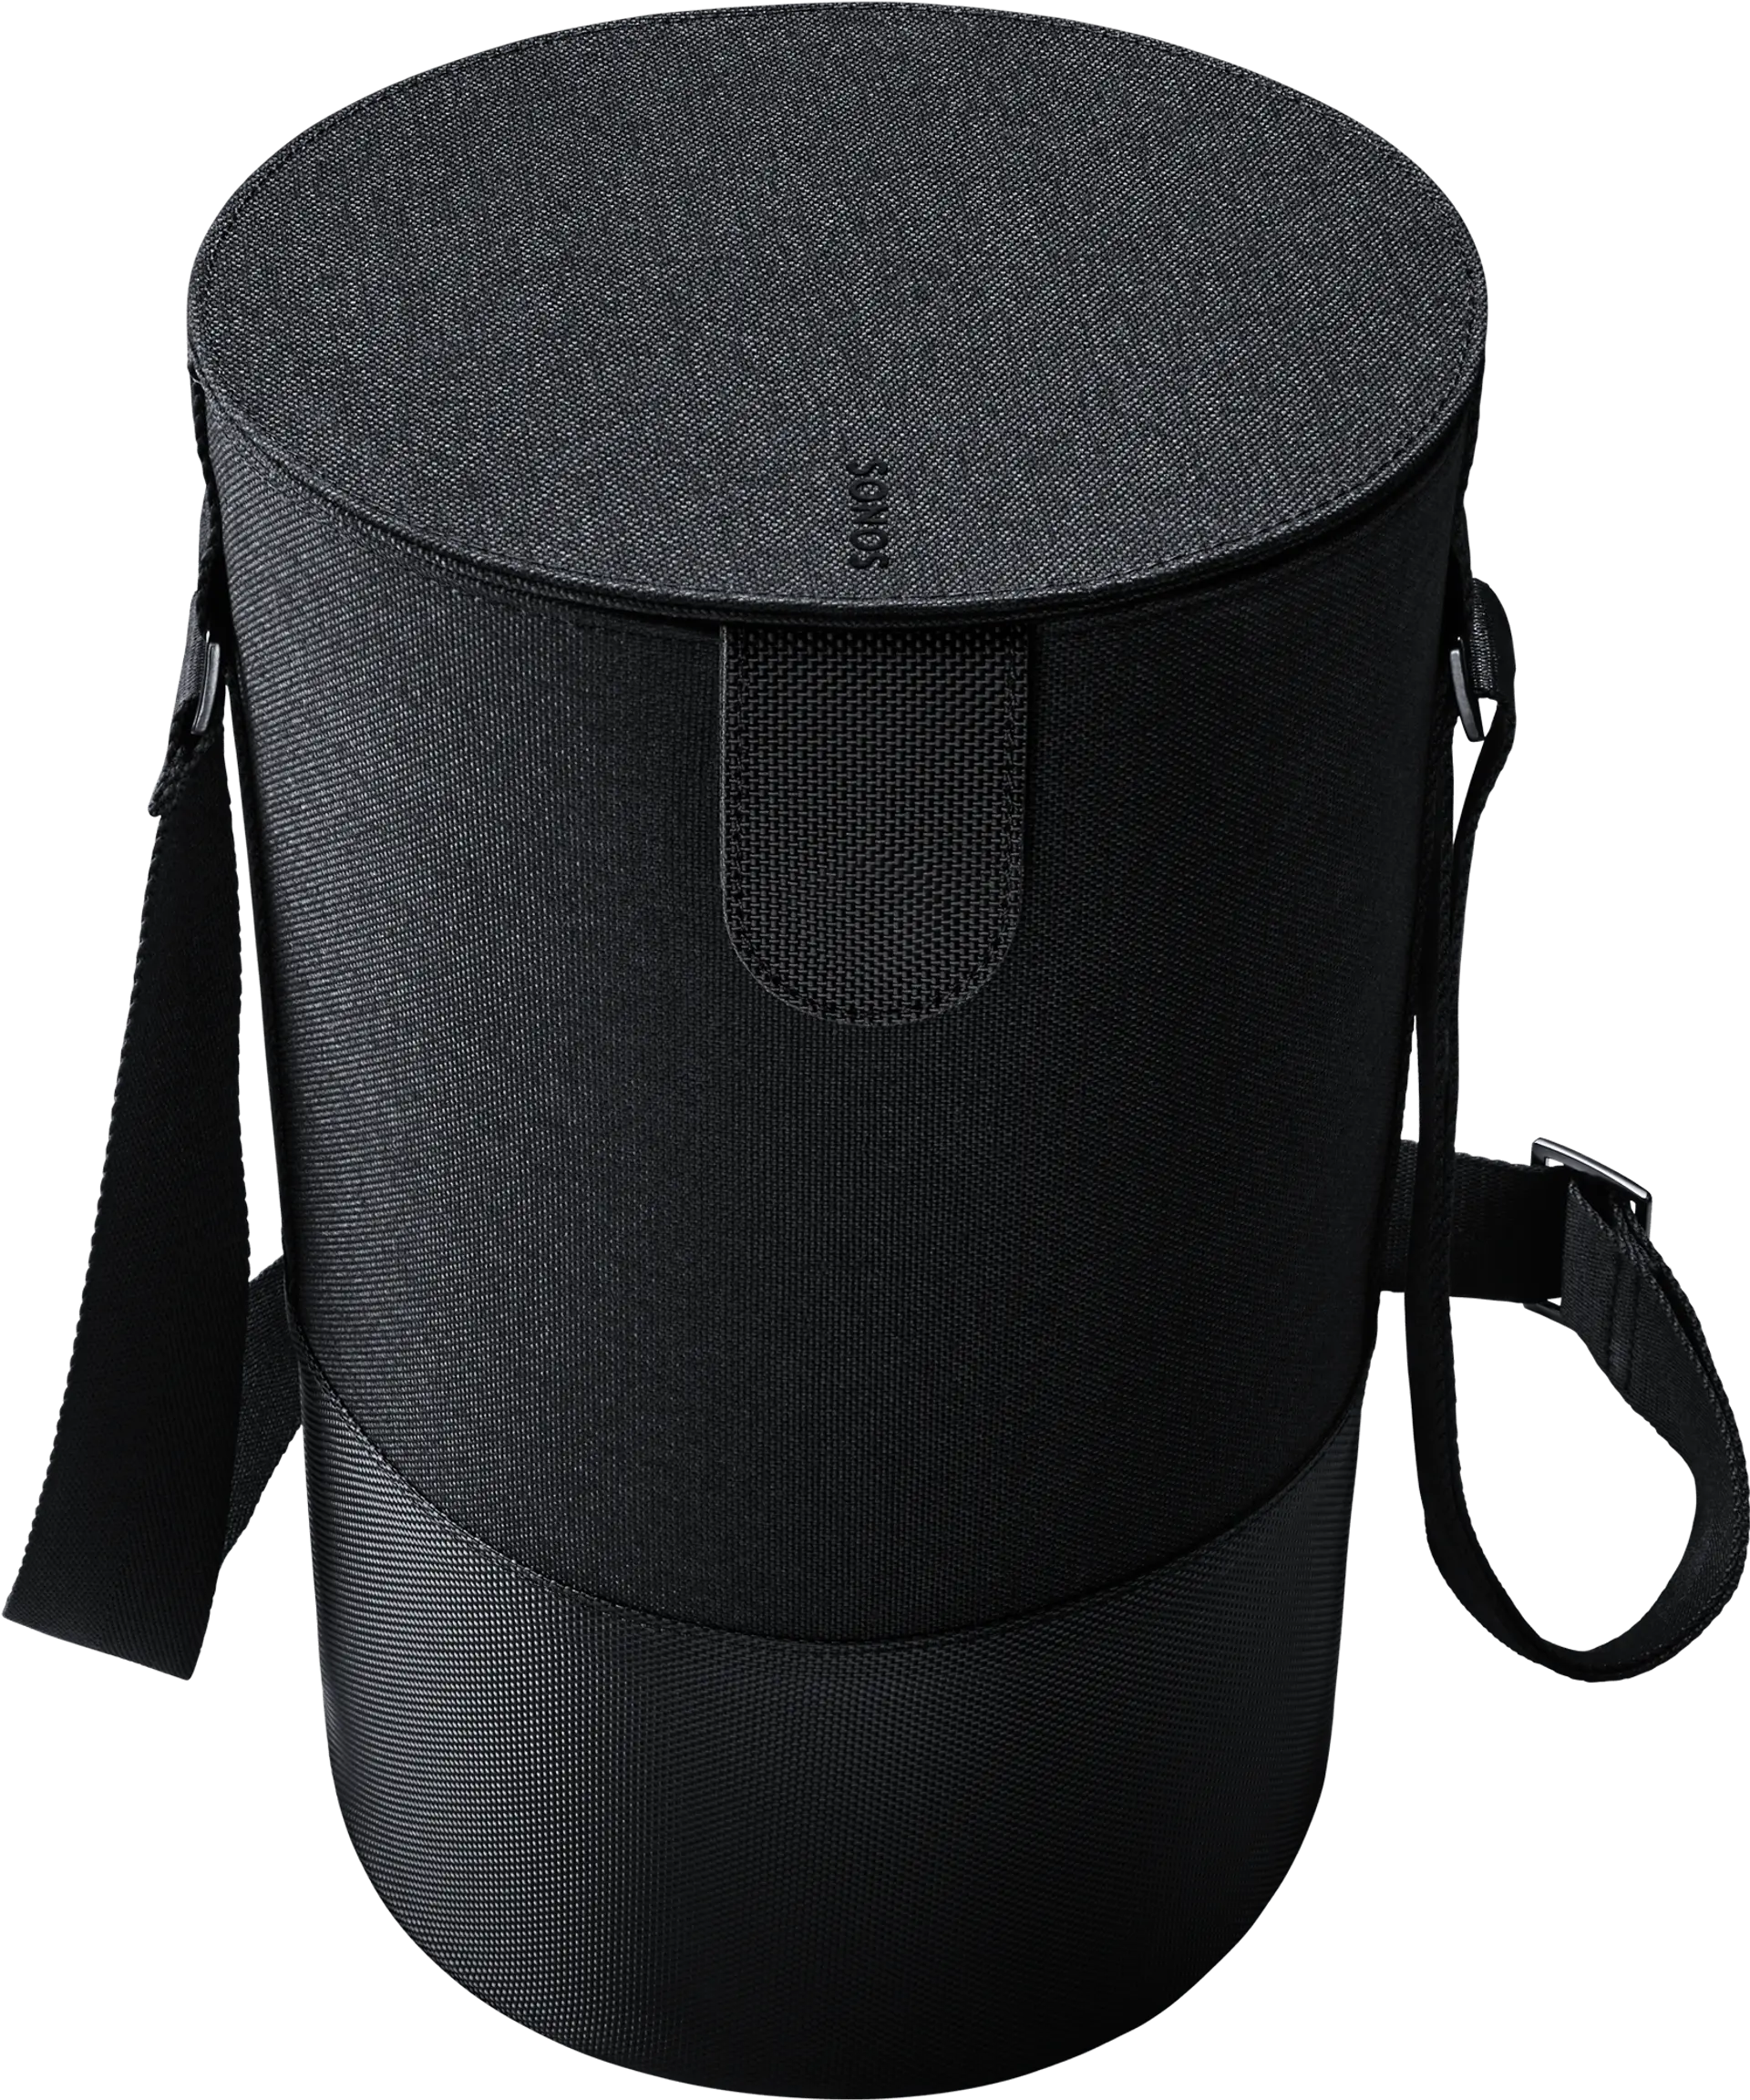 Accessories | Travel bag for Sonos Move